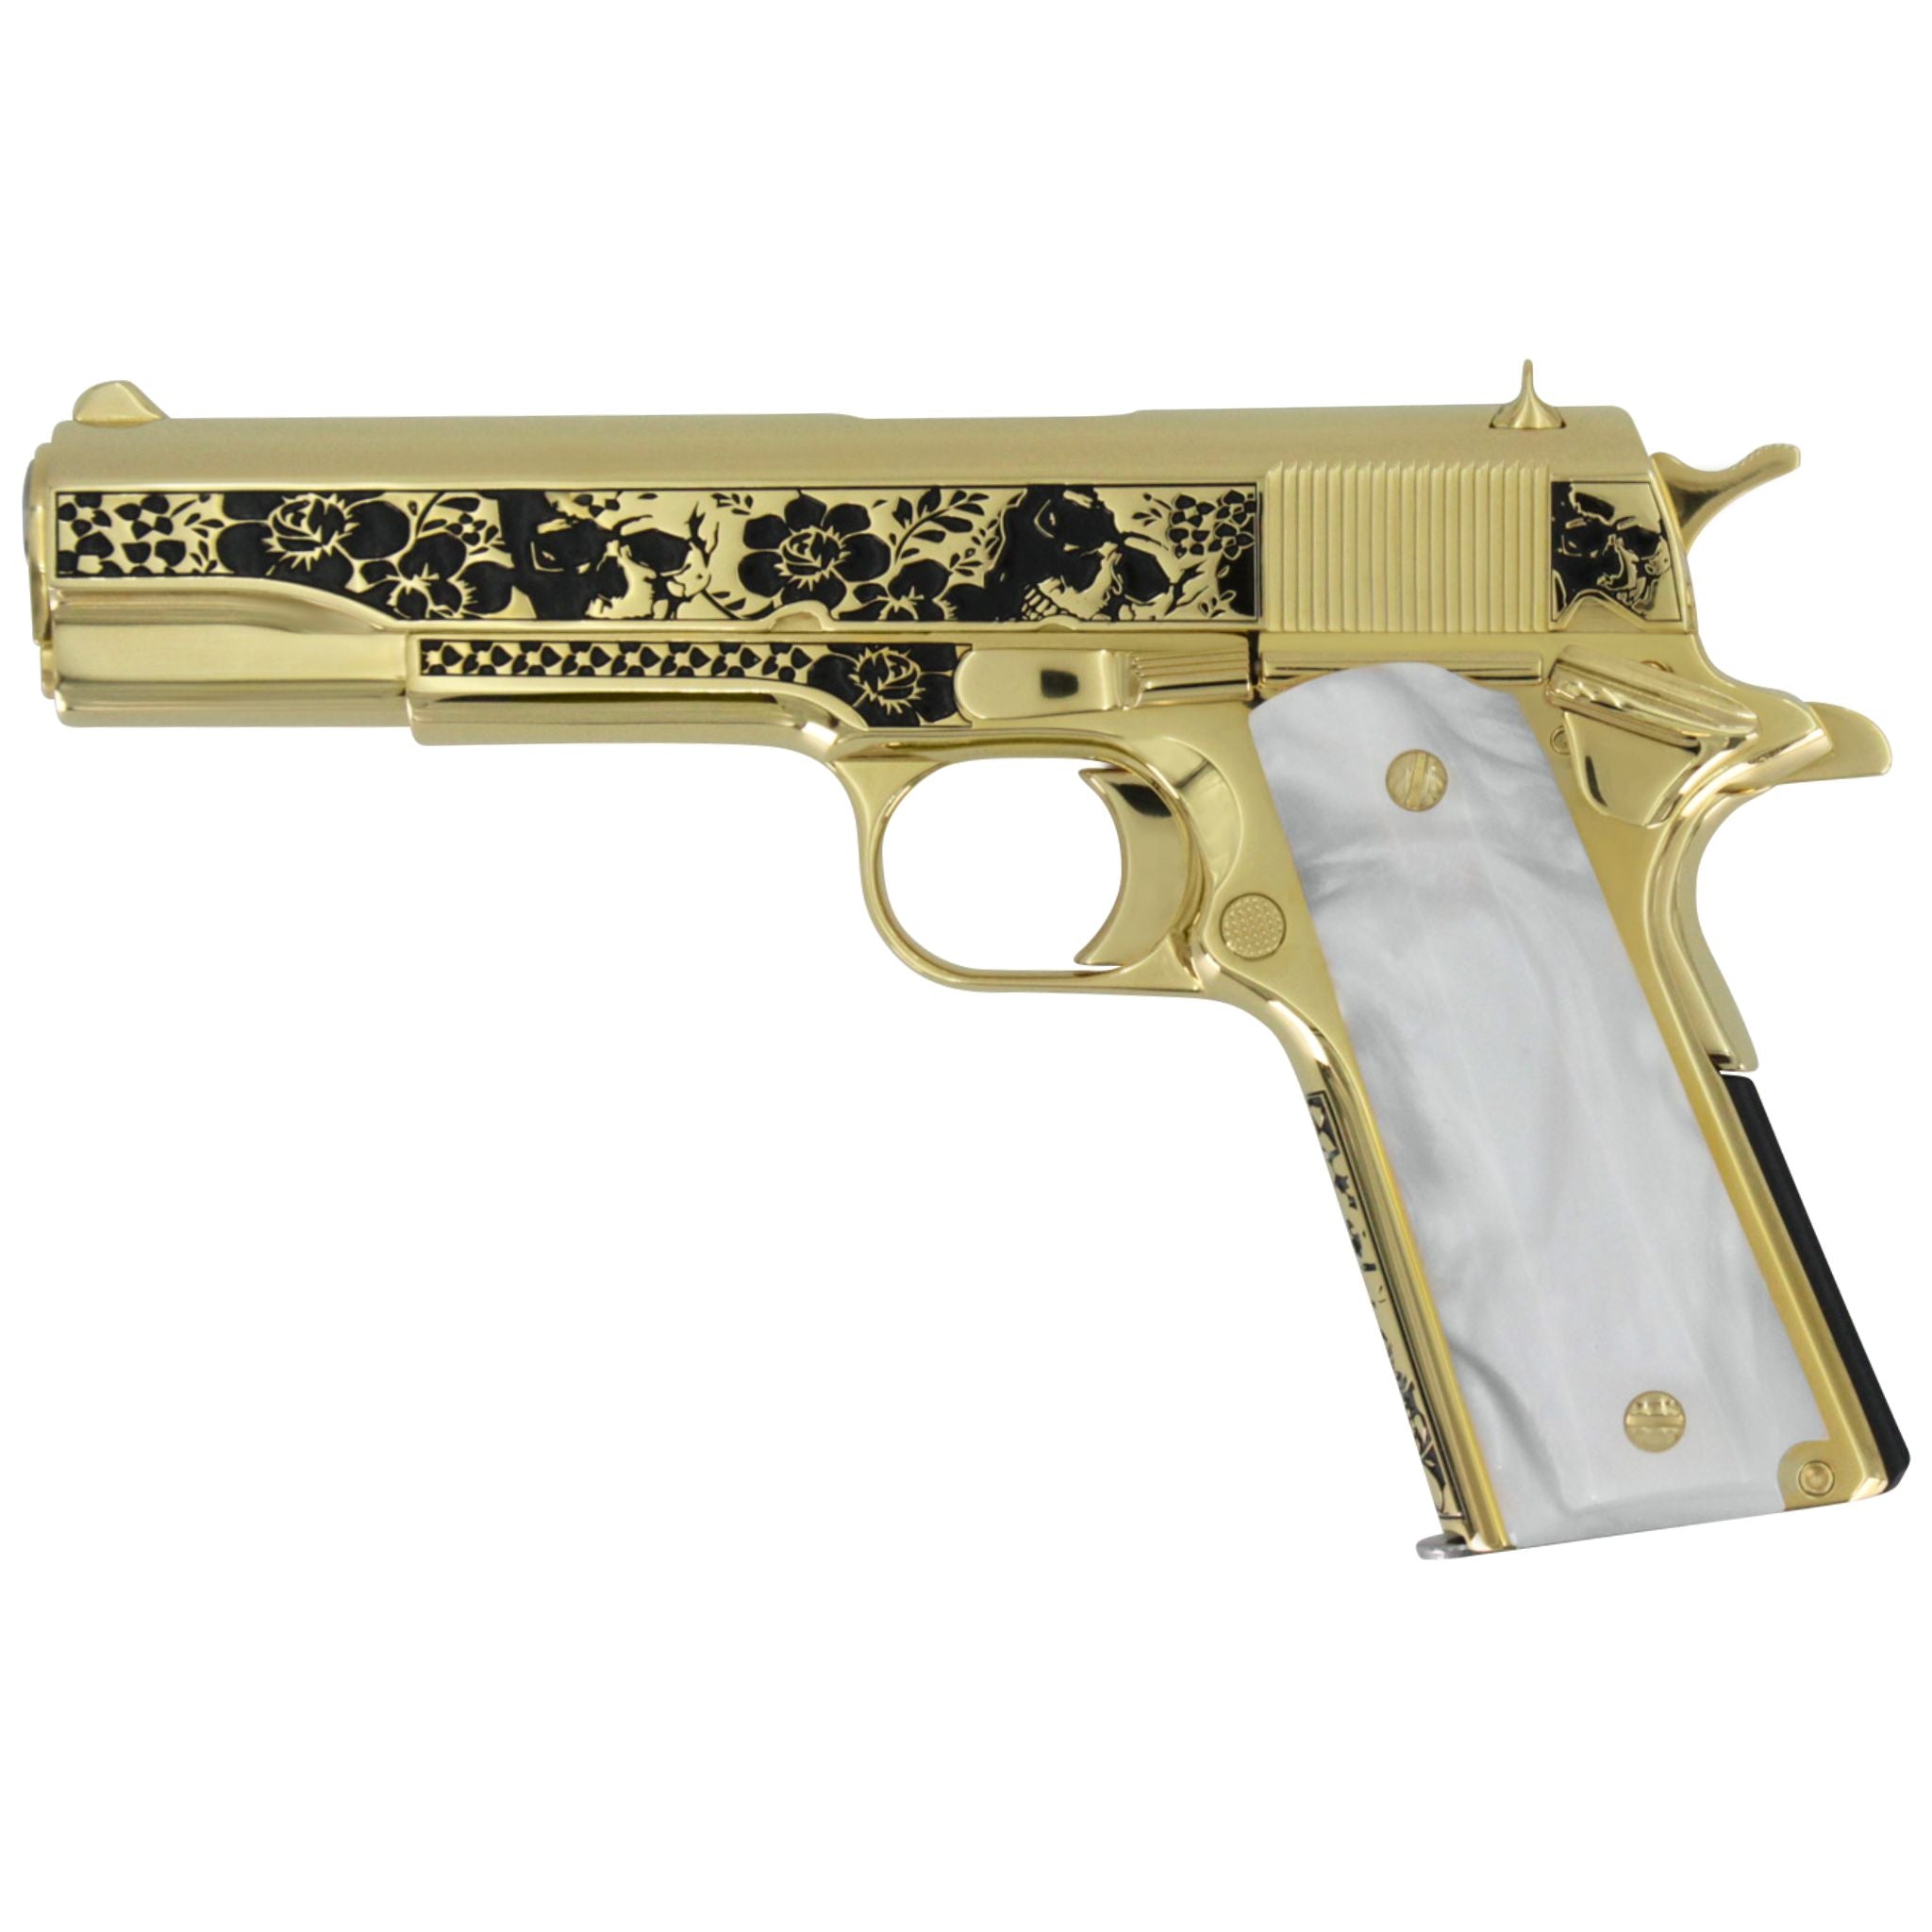 Colt 1911 Government, 45ACP, Memento Vivere, 24K All Gold Plated, Pearlized Polymer Grips, 24 karat Gold Guns,4355355869286,  098289112187